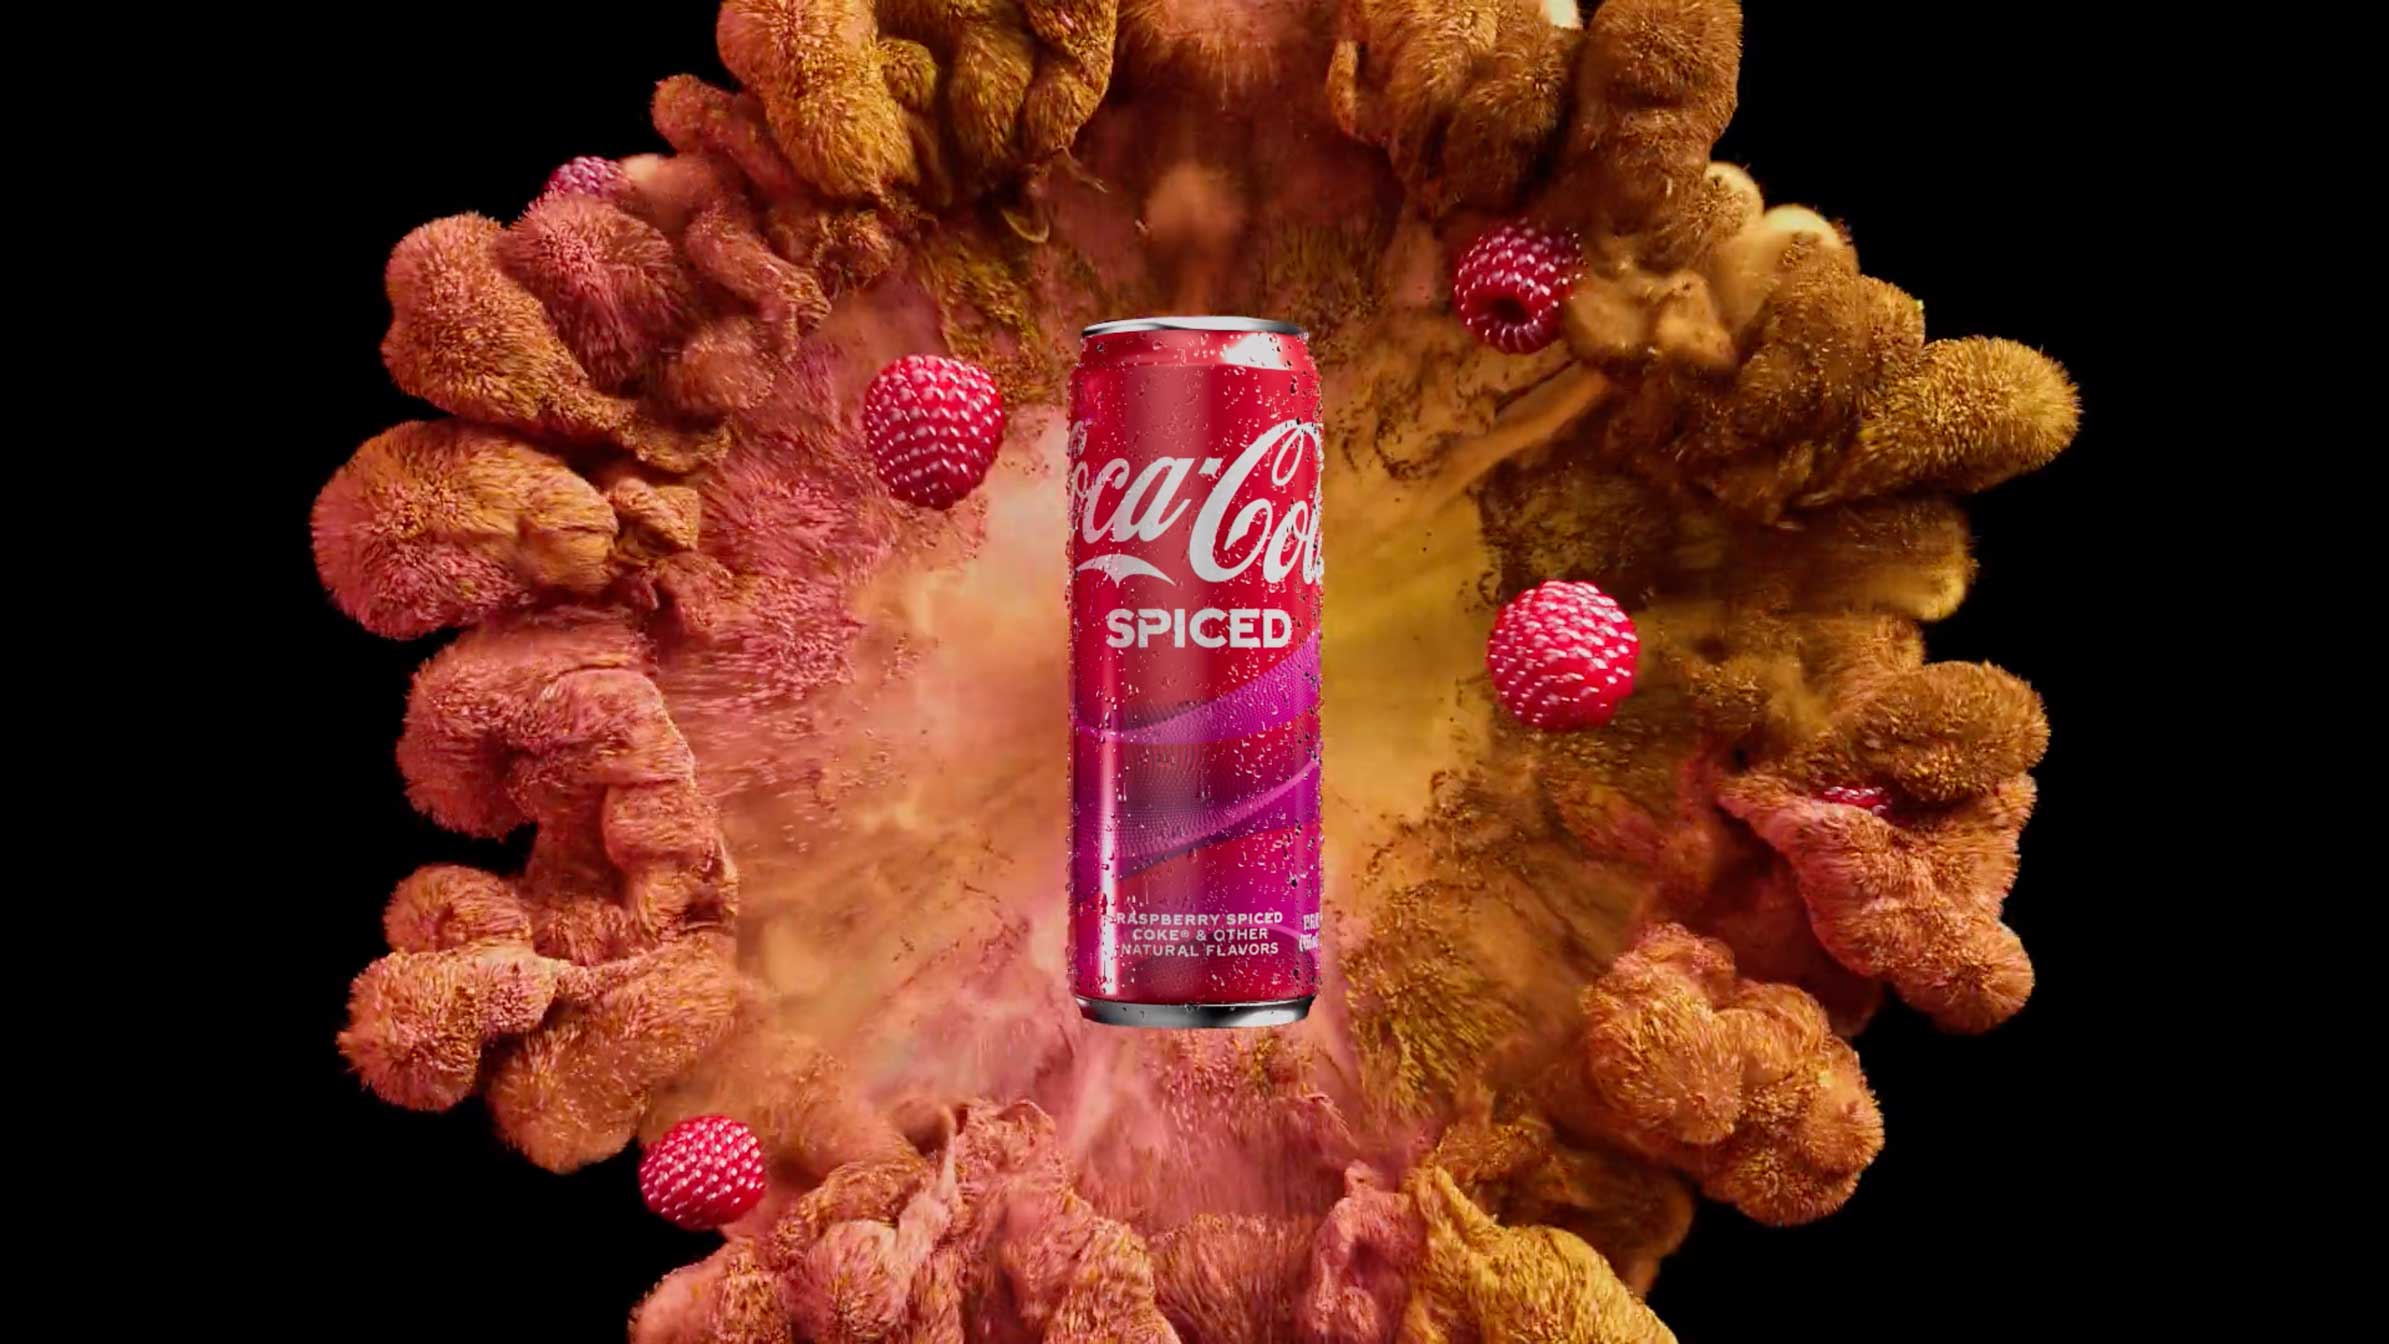 Coke Spiced Launch by MAMMAL and Momemtum | STASH MAGAZINE